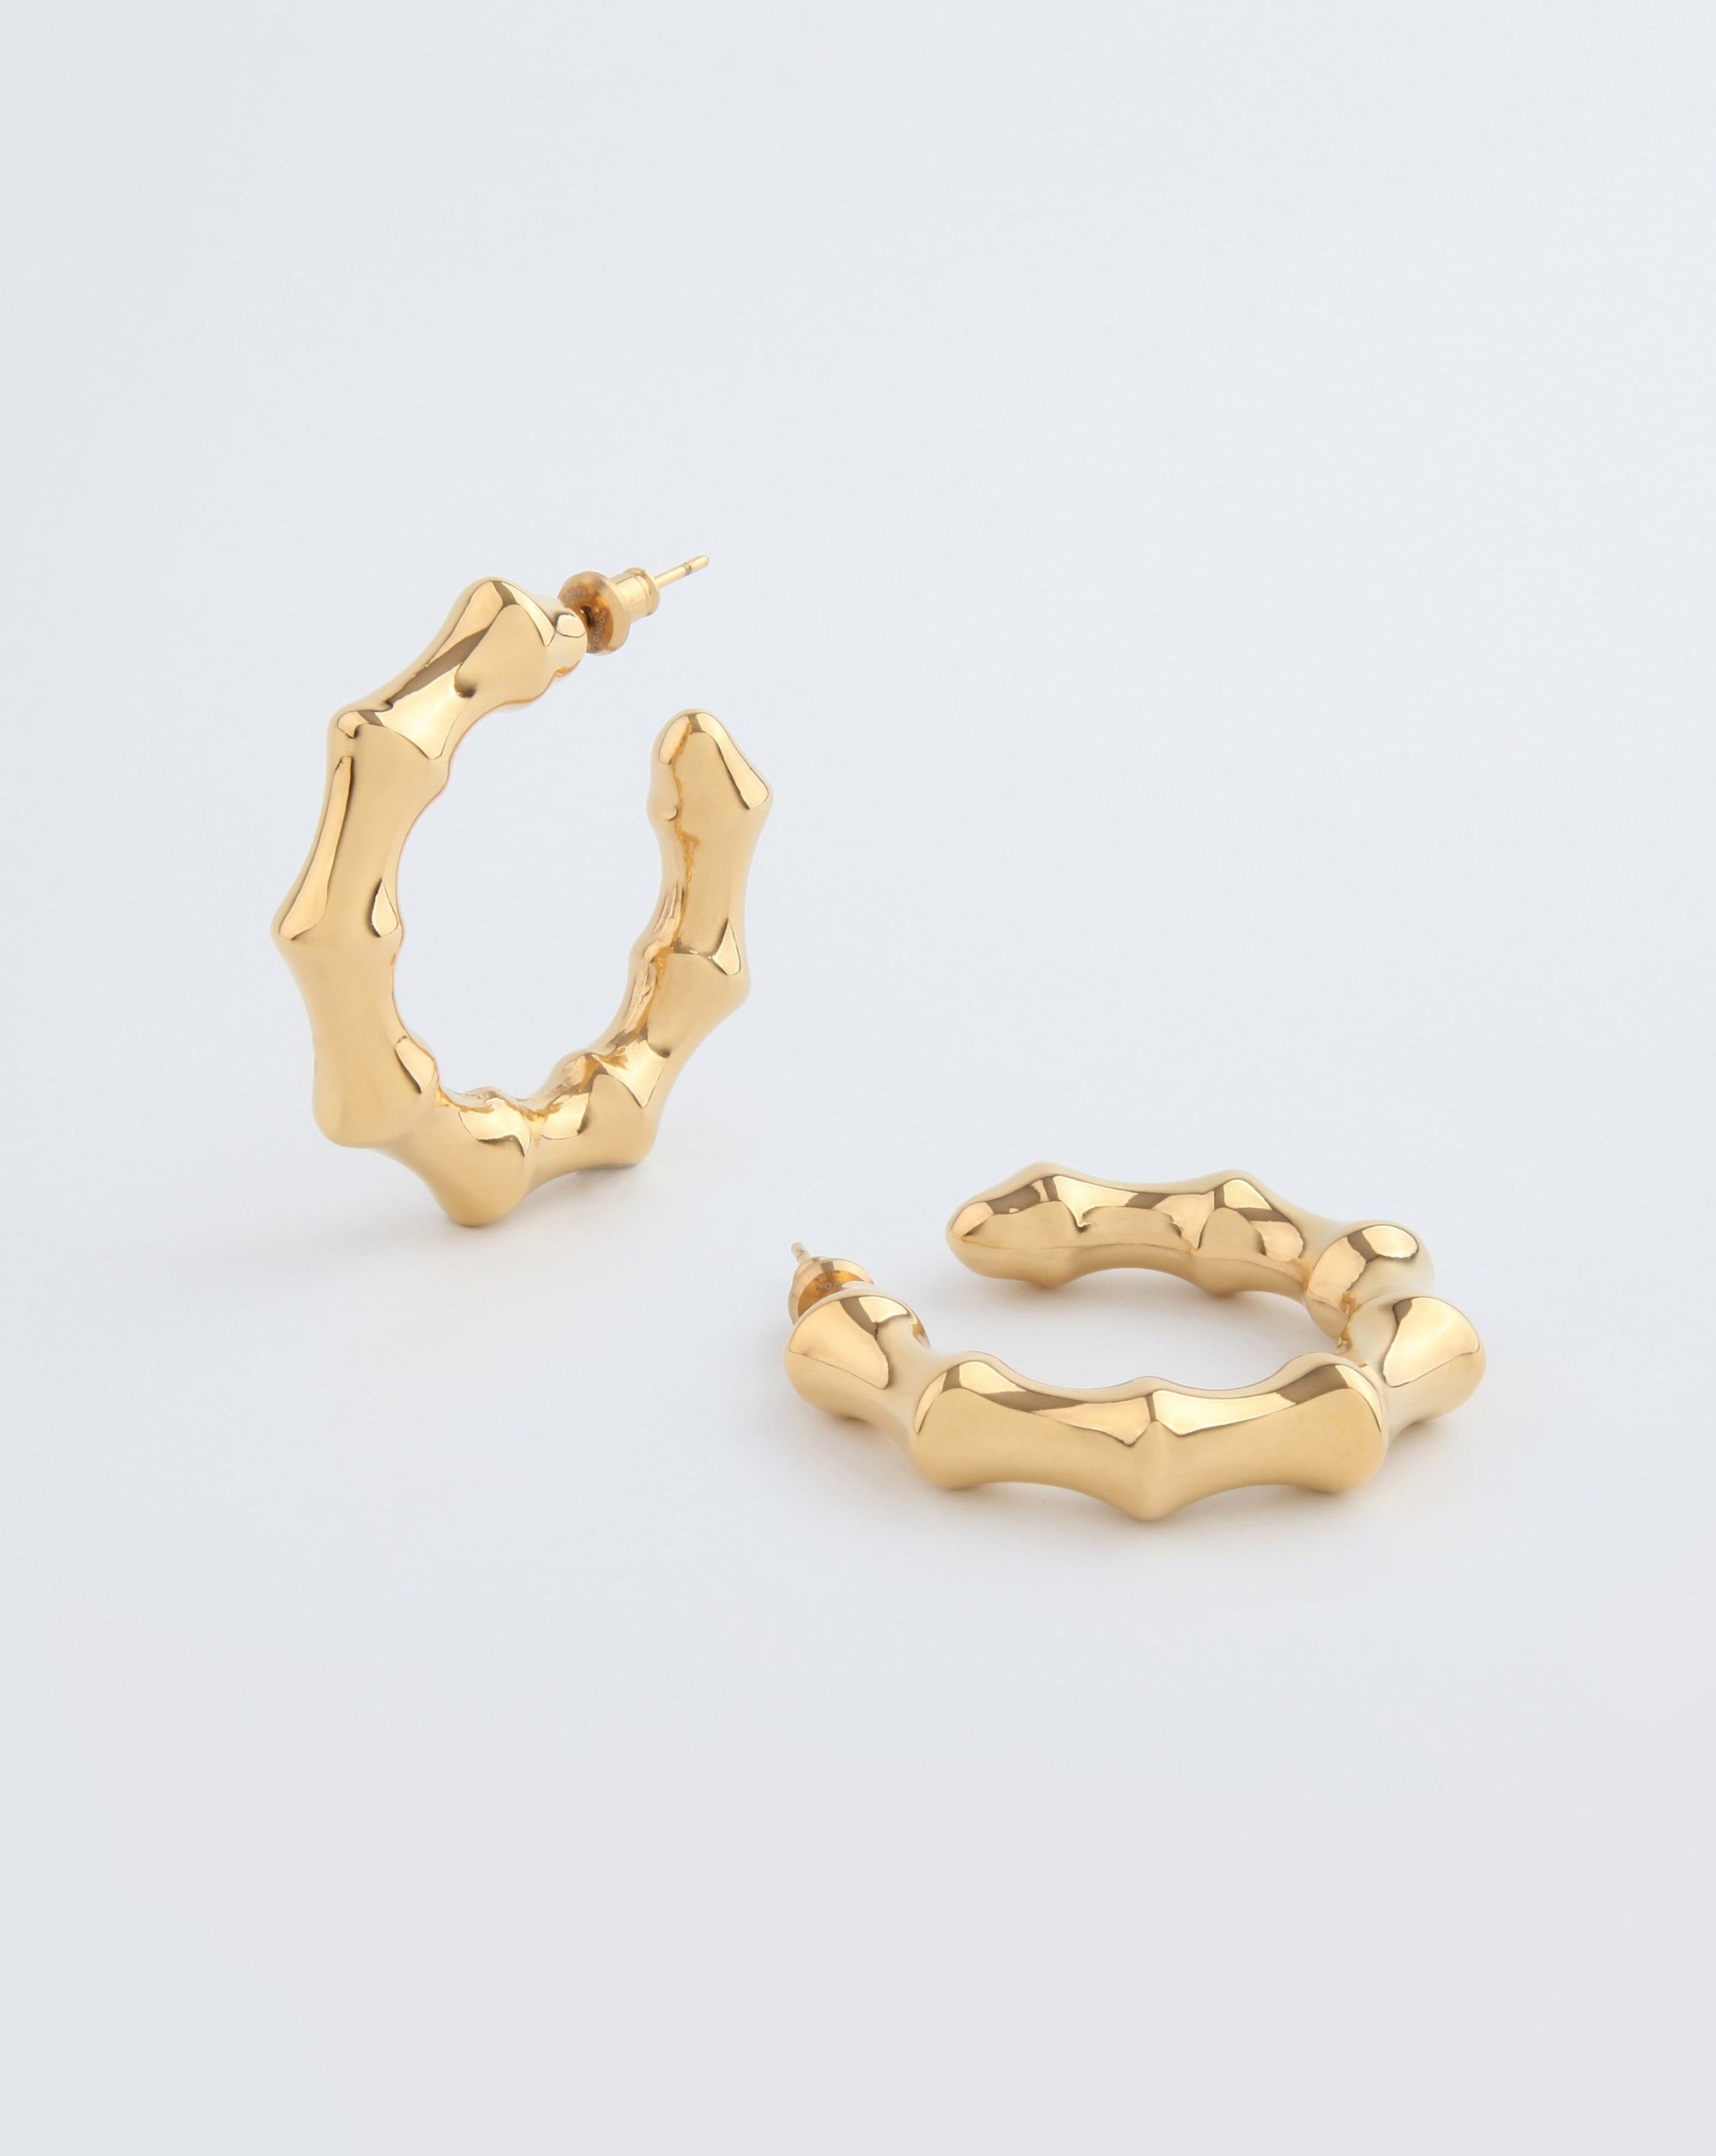 A pair of Bamboo Earrings Gold from For Art's Sake® with a unique, wavy, and textured design. Featuring a shiny finish and post-back fastening, they are displayed on a plain white background, with one standing upright and the other lying flat.